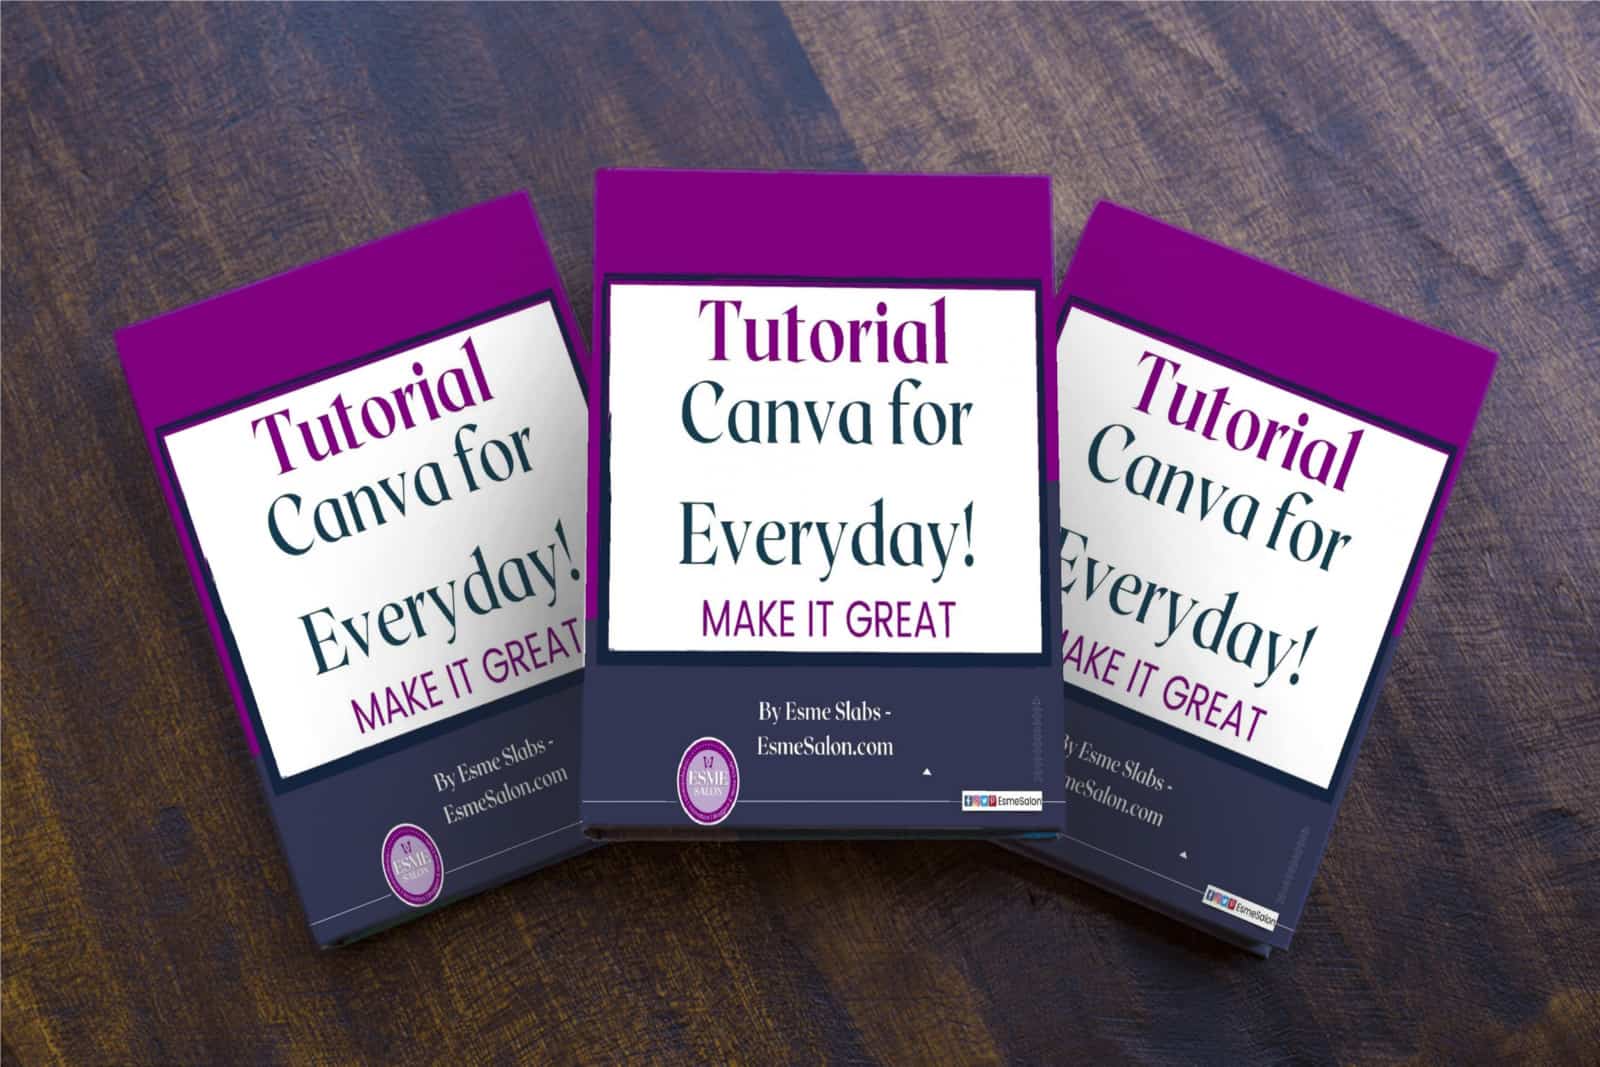 Three eBooks for Tutorial Canva for Everyday left on a brown wooden table